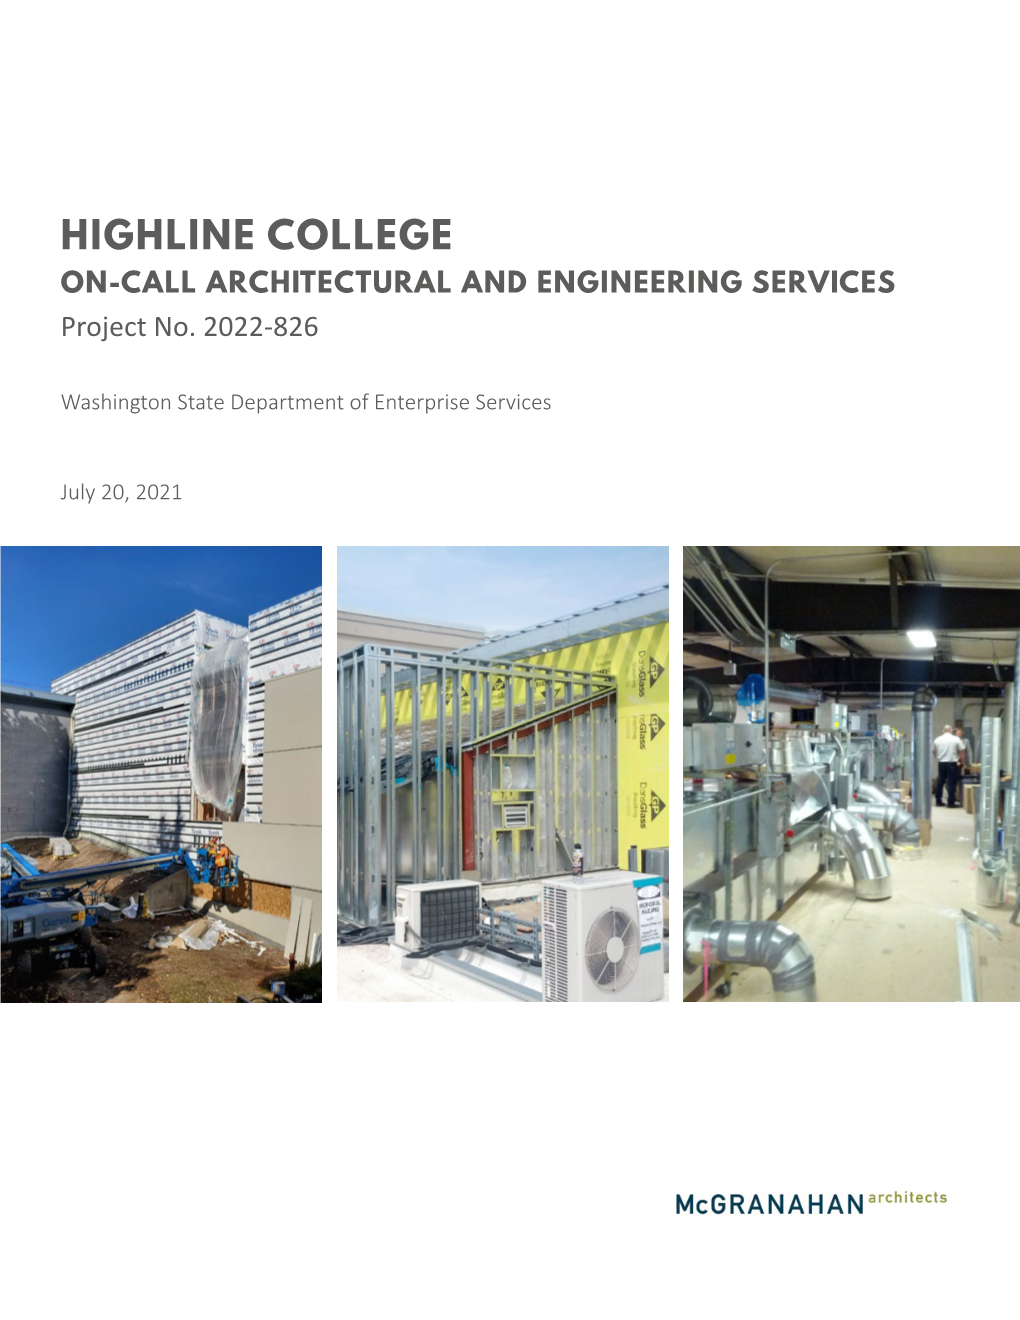 HIGHLINE COLLEGE ON-CALL ARCHITECTURAL and ENGINEERING SERVICES Project No